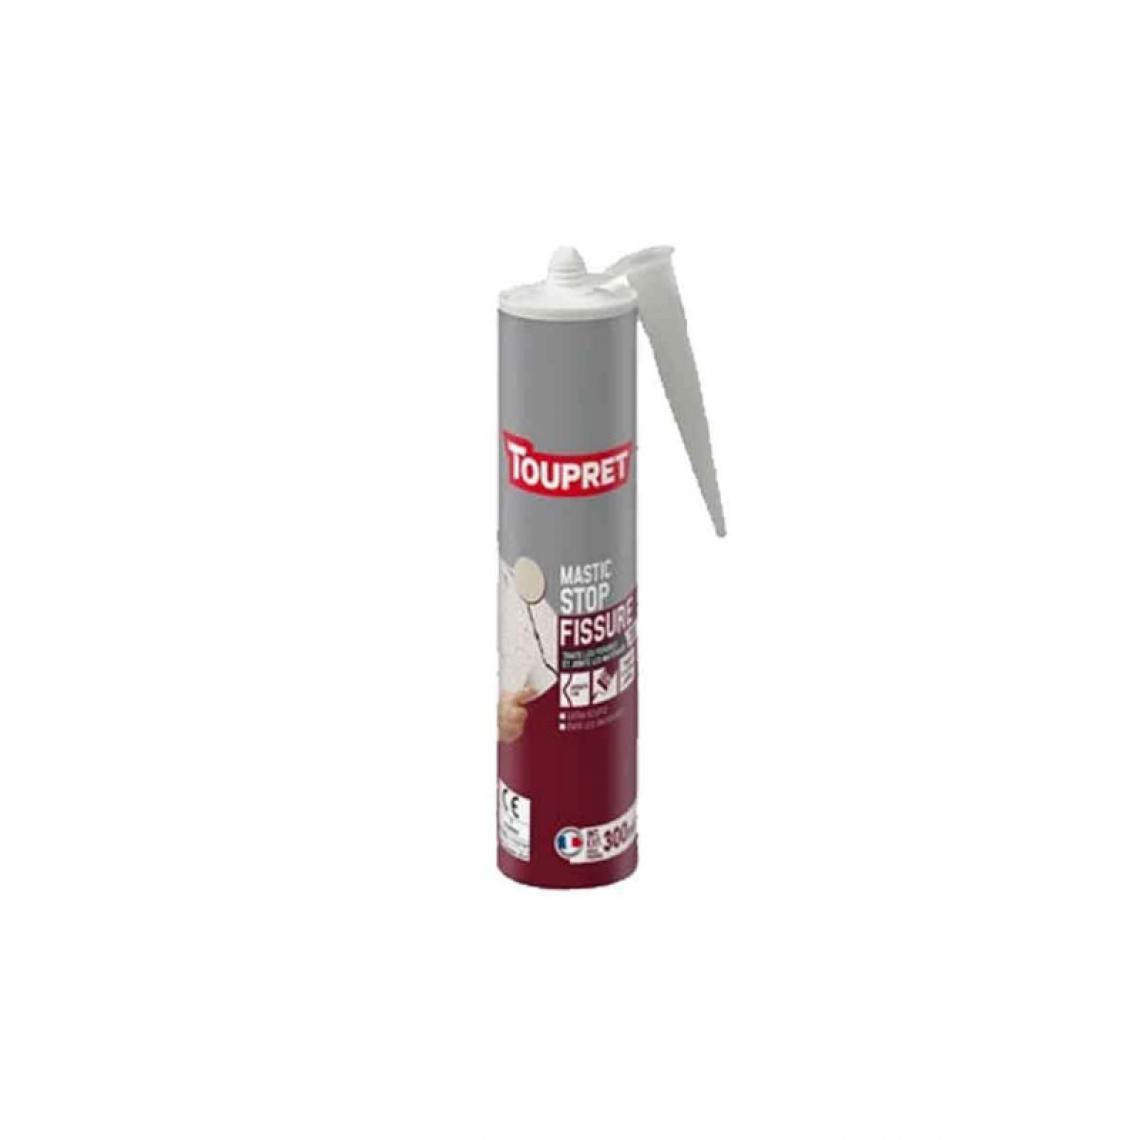 Toupret - Mastic Stop fissures TOUPRET 300ml Pierre - BCMACEXP300 - Mastic, silicone, joint